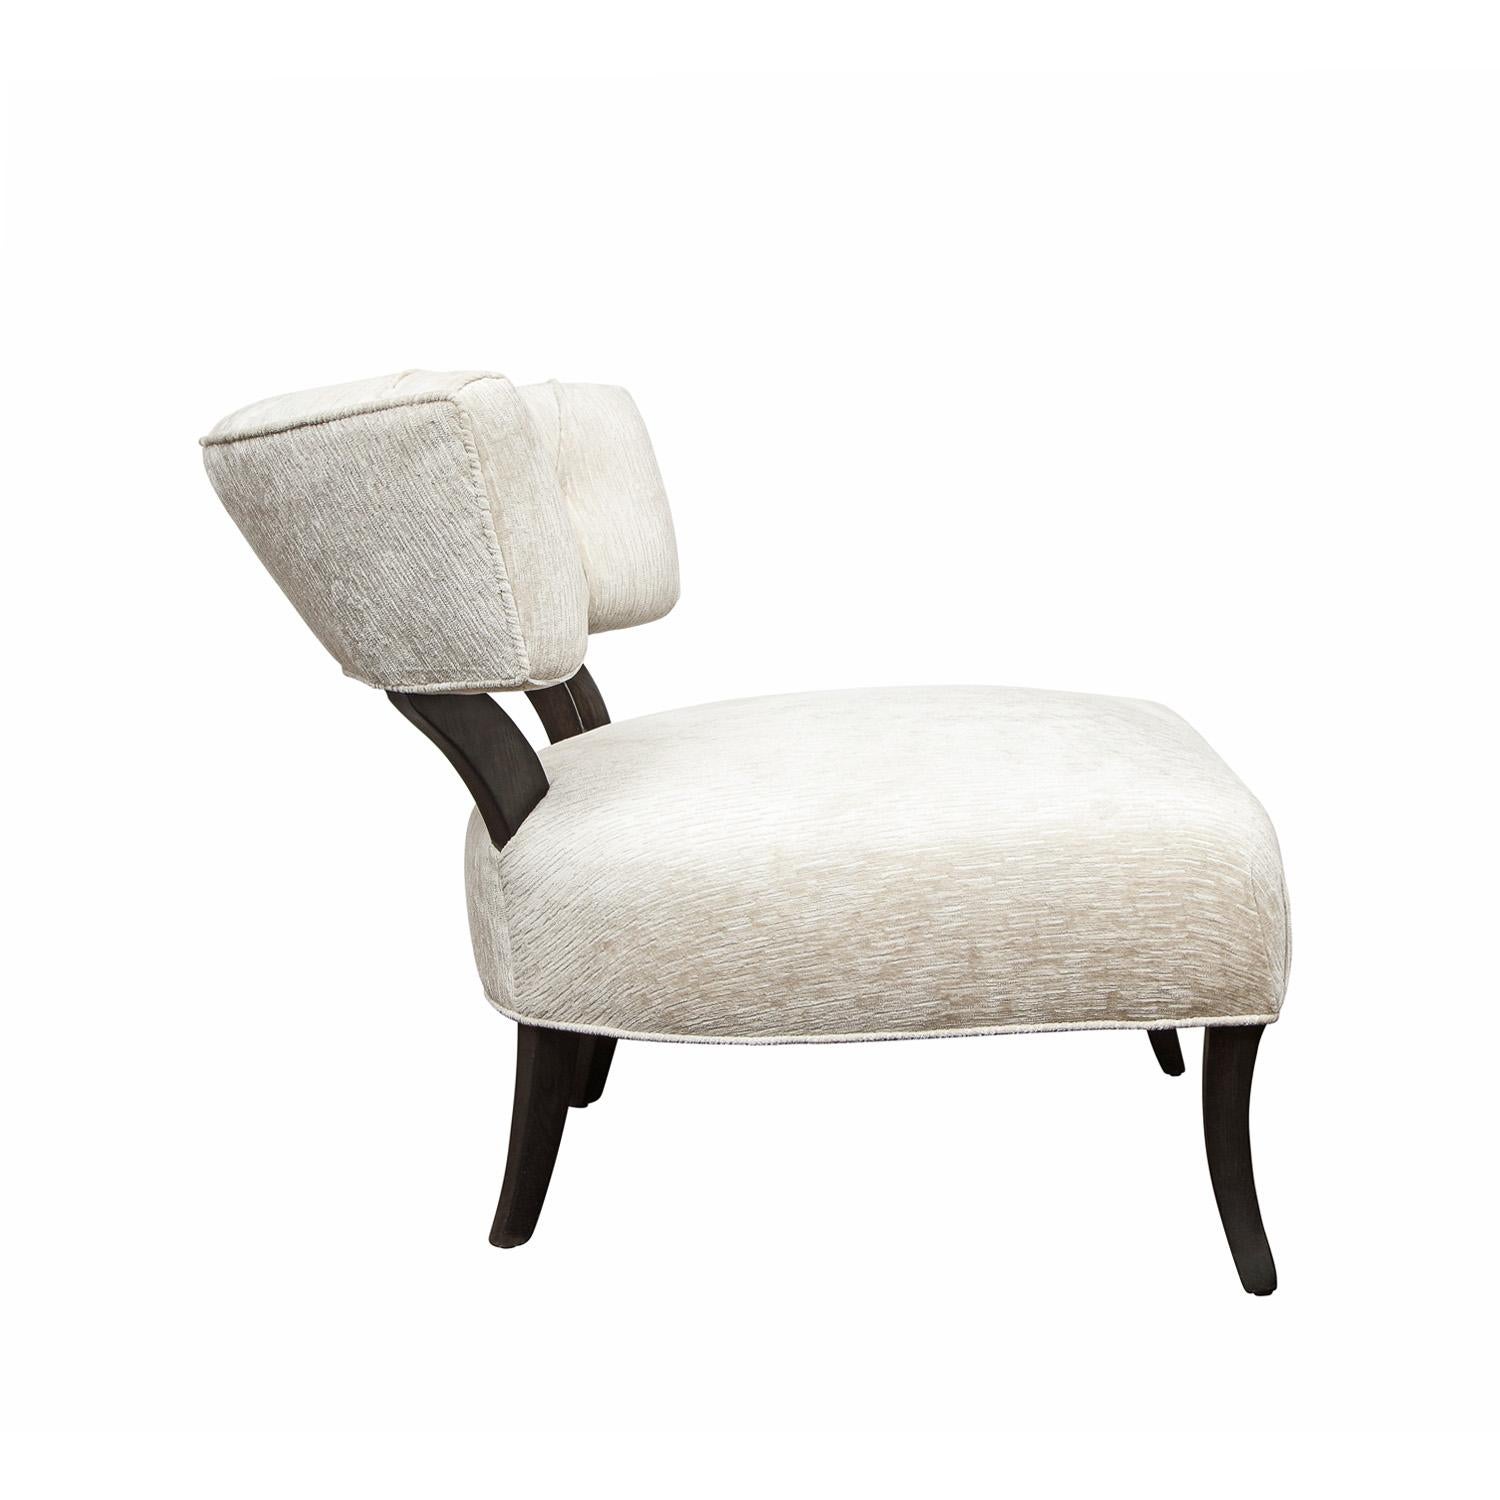 Hand-Crafted Pair of Elegant Slipper Chairs in The Manner of Billy Haines 1940s For Sale